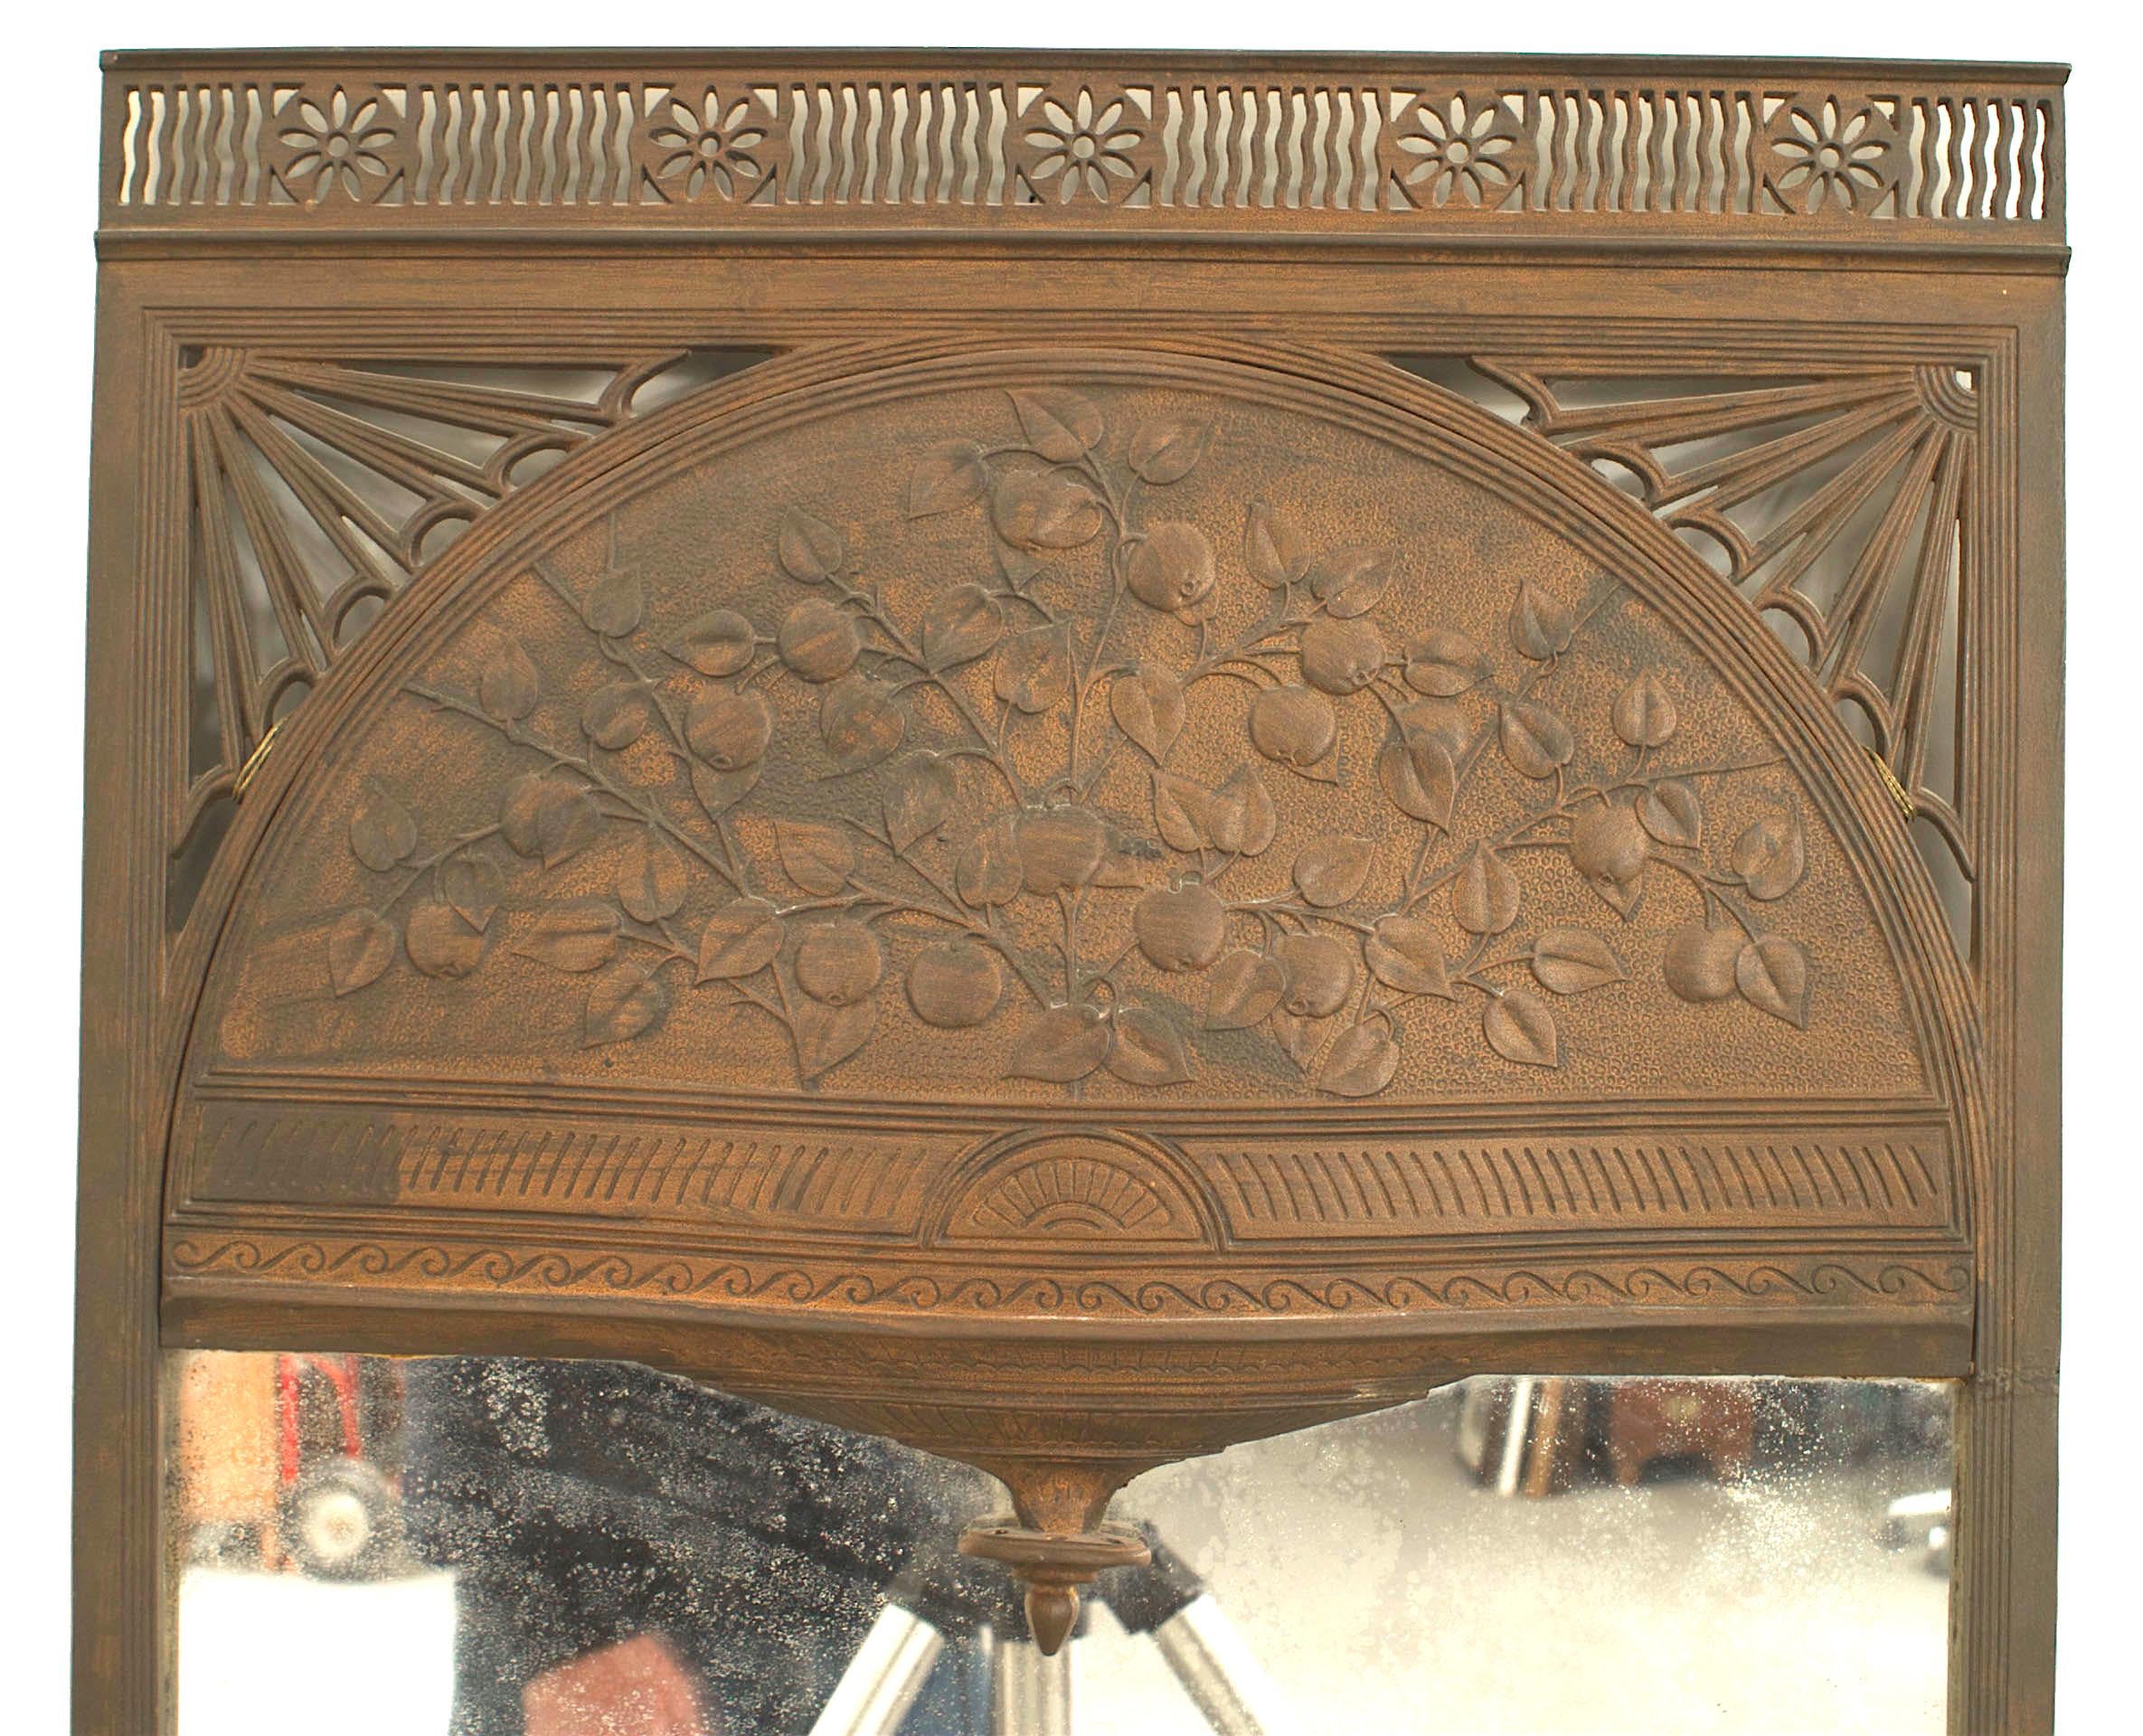 English Arts & Crafts iron mirror with a pierced frame surrounding a floral scene.
